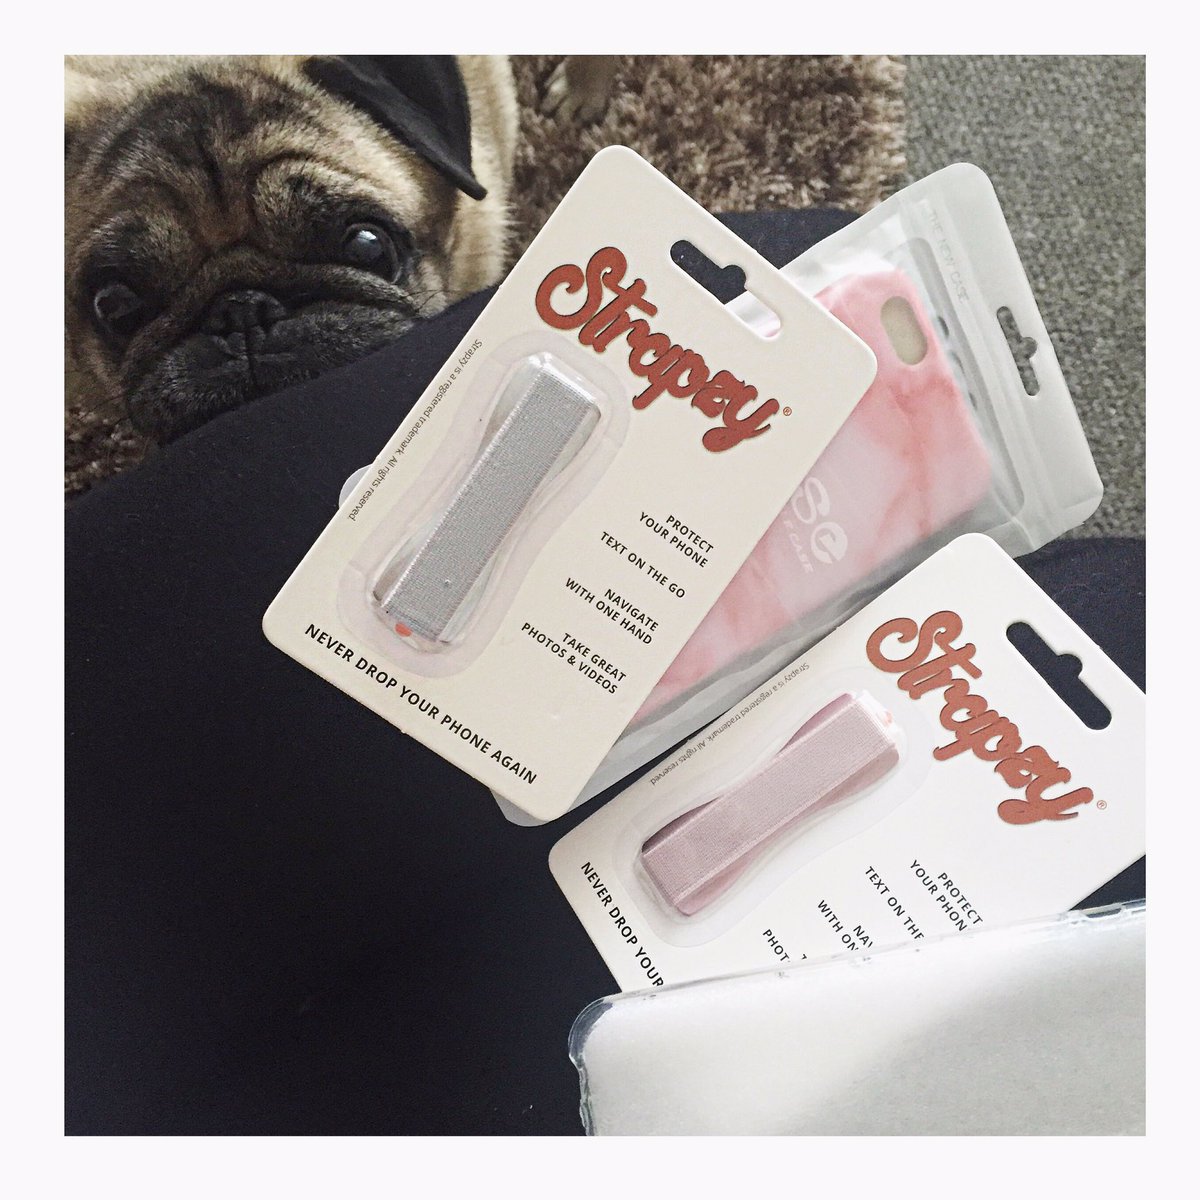 Me (and Colin) are pleased with my @strapzy_ delivery today!! ❤️???????????????? https://t.co/T0QC4792er